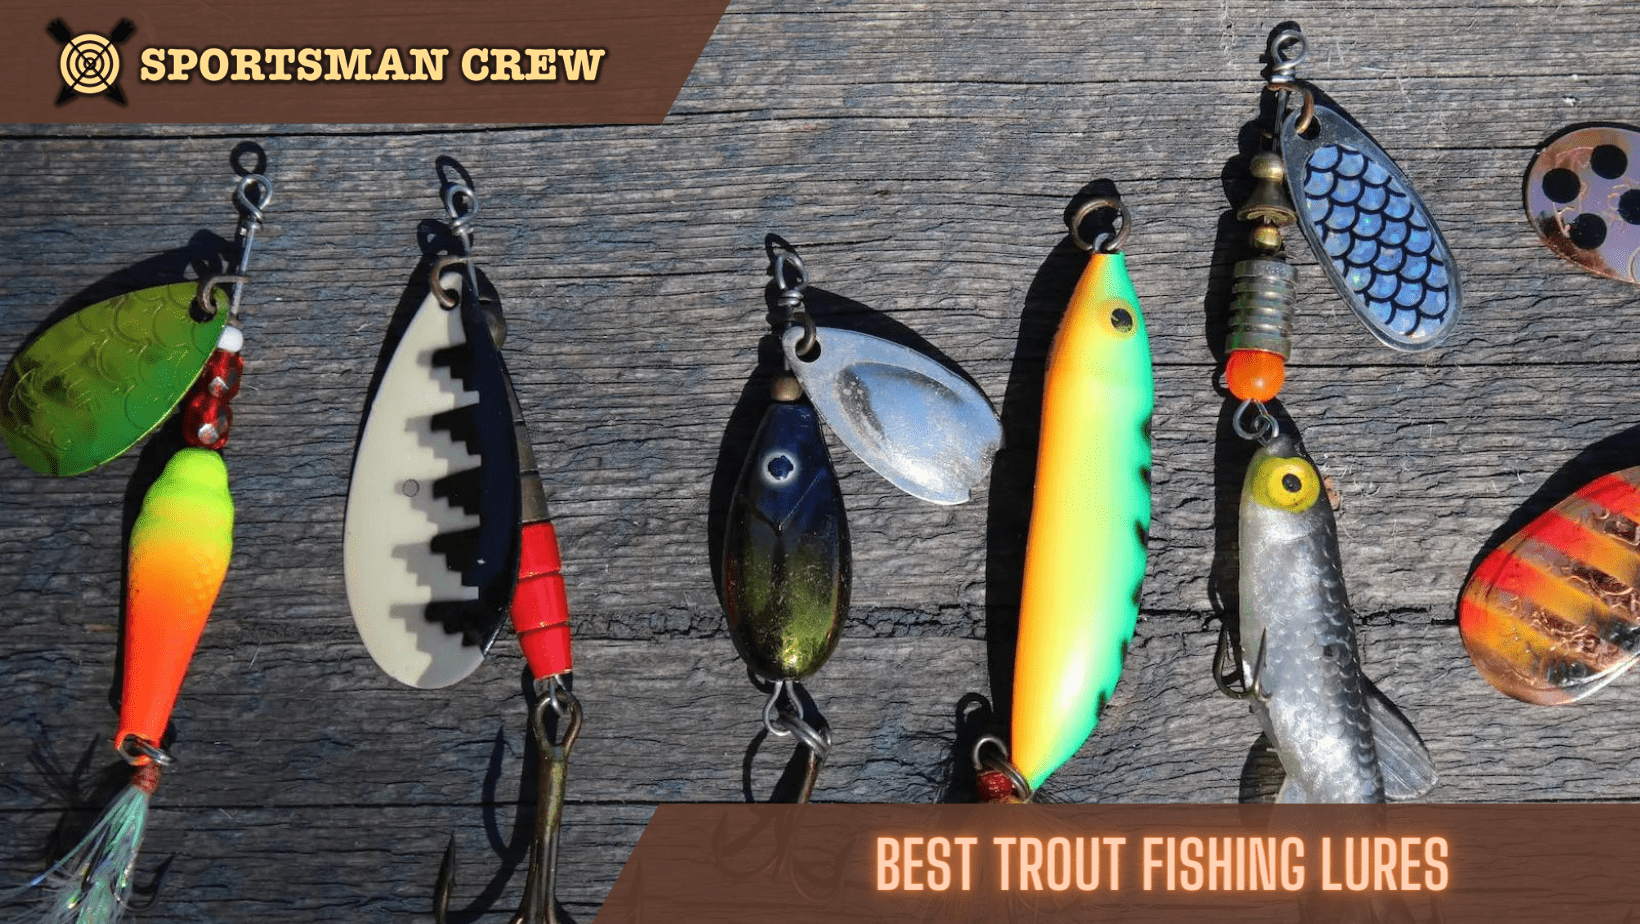 Best Trout Fishing Lures